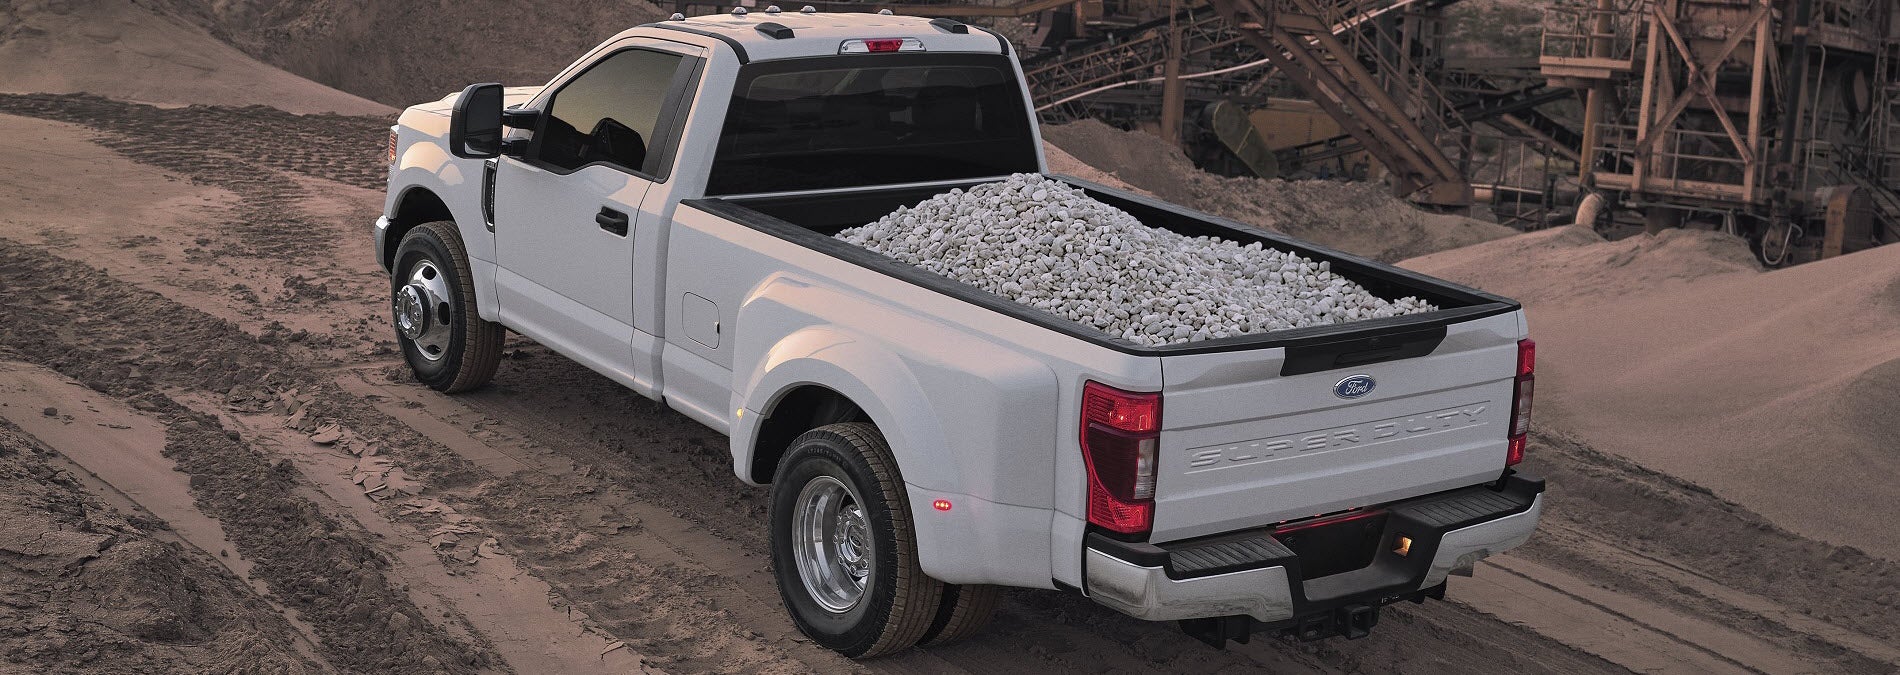 Ford Super Duty Payload